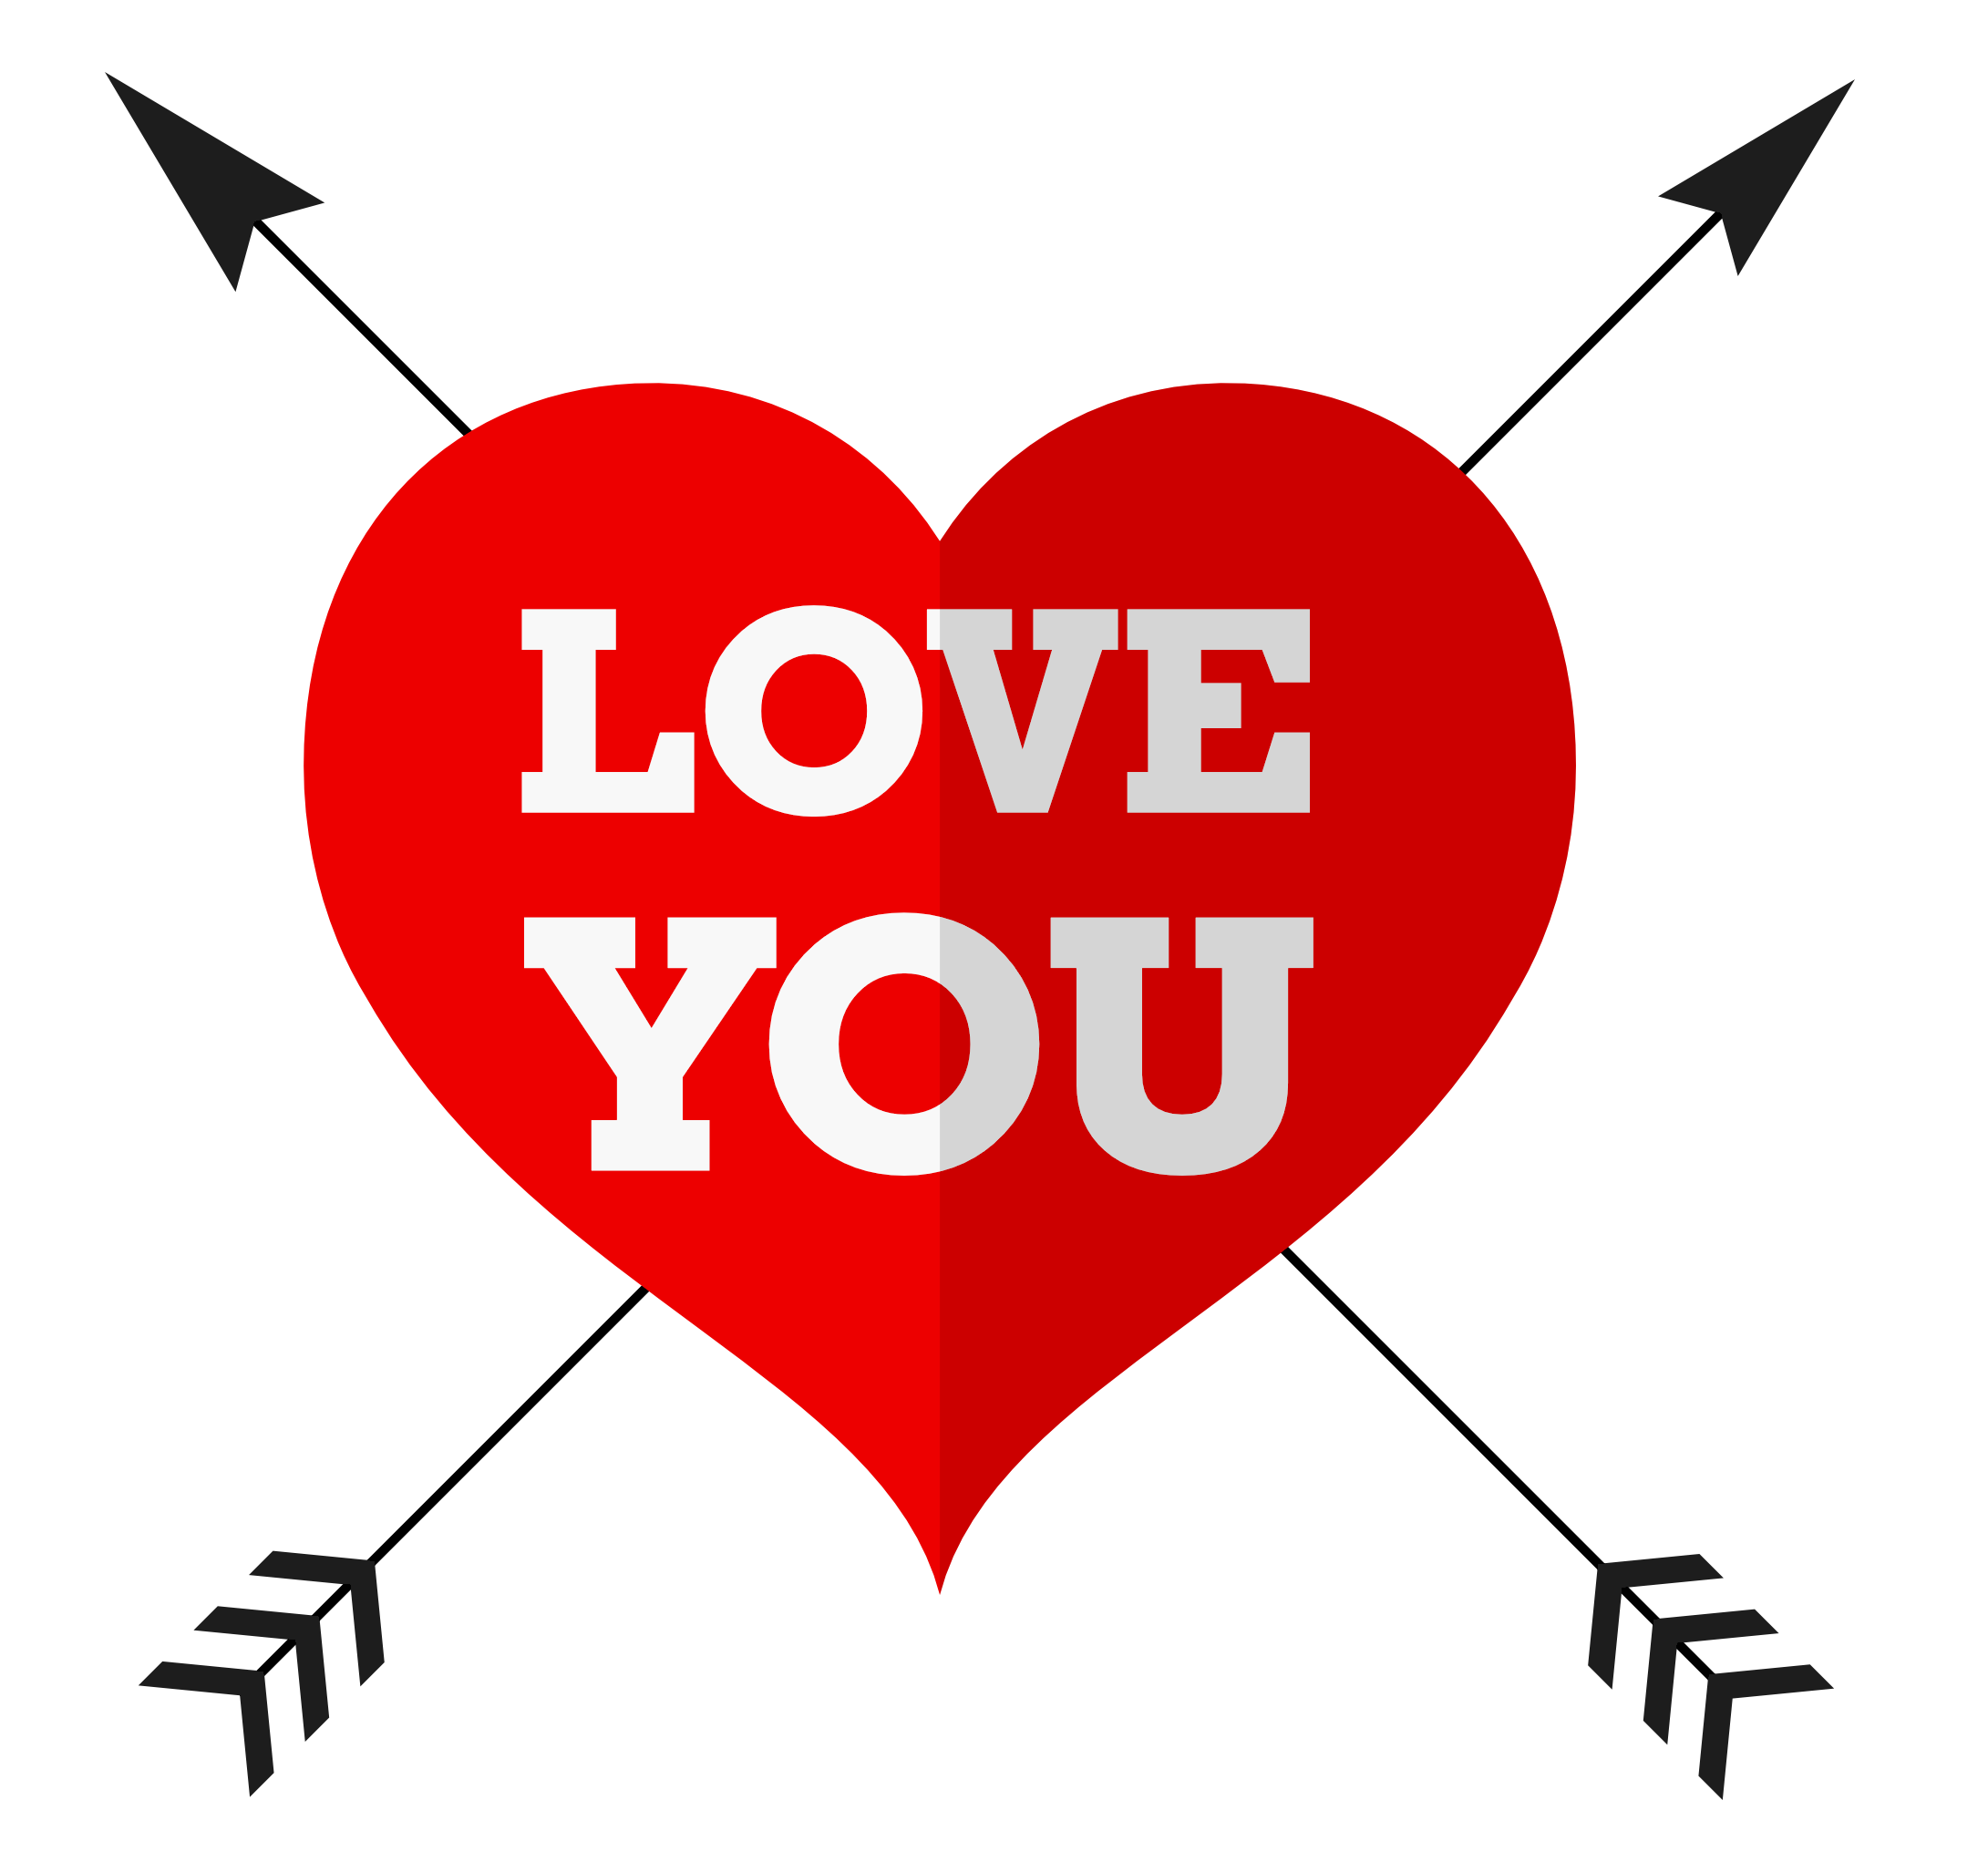 Love PNG images free download.